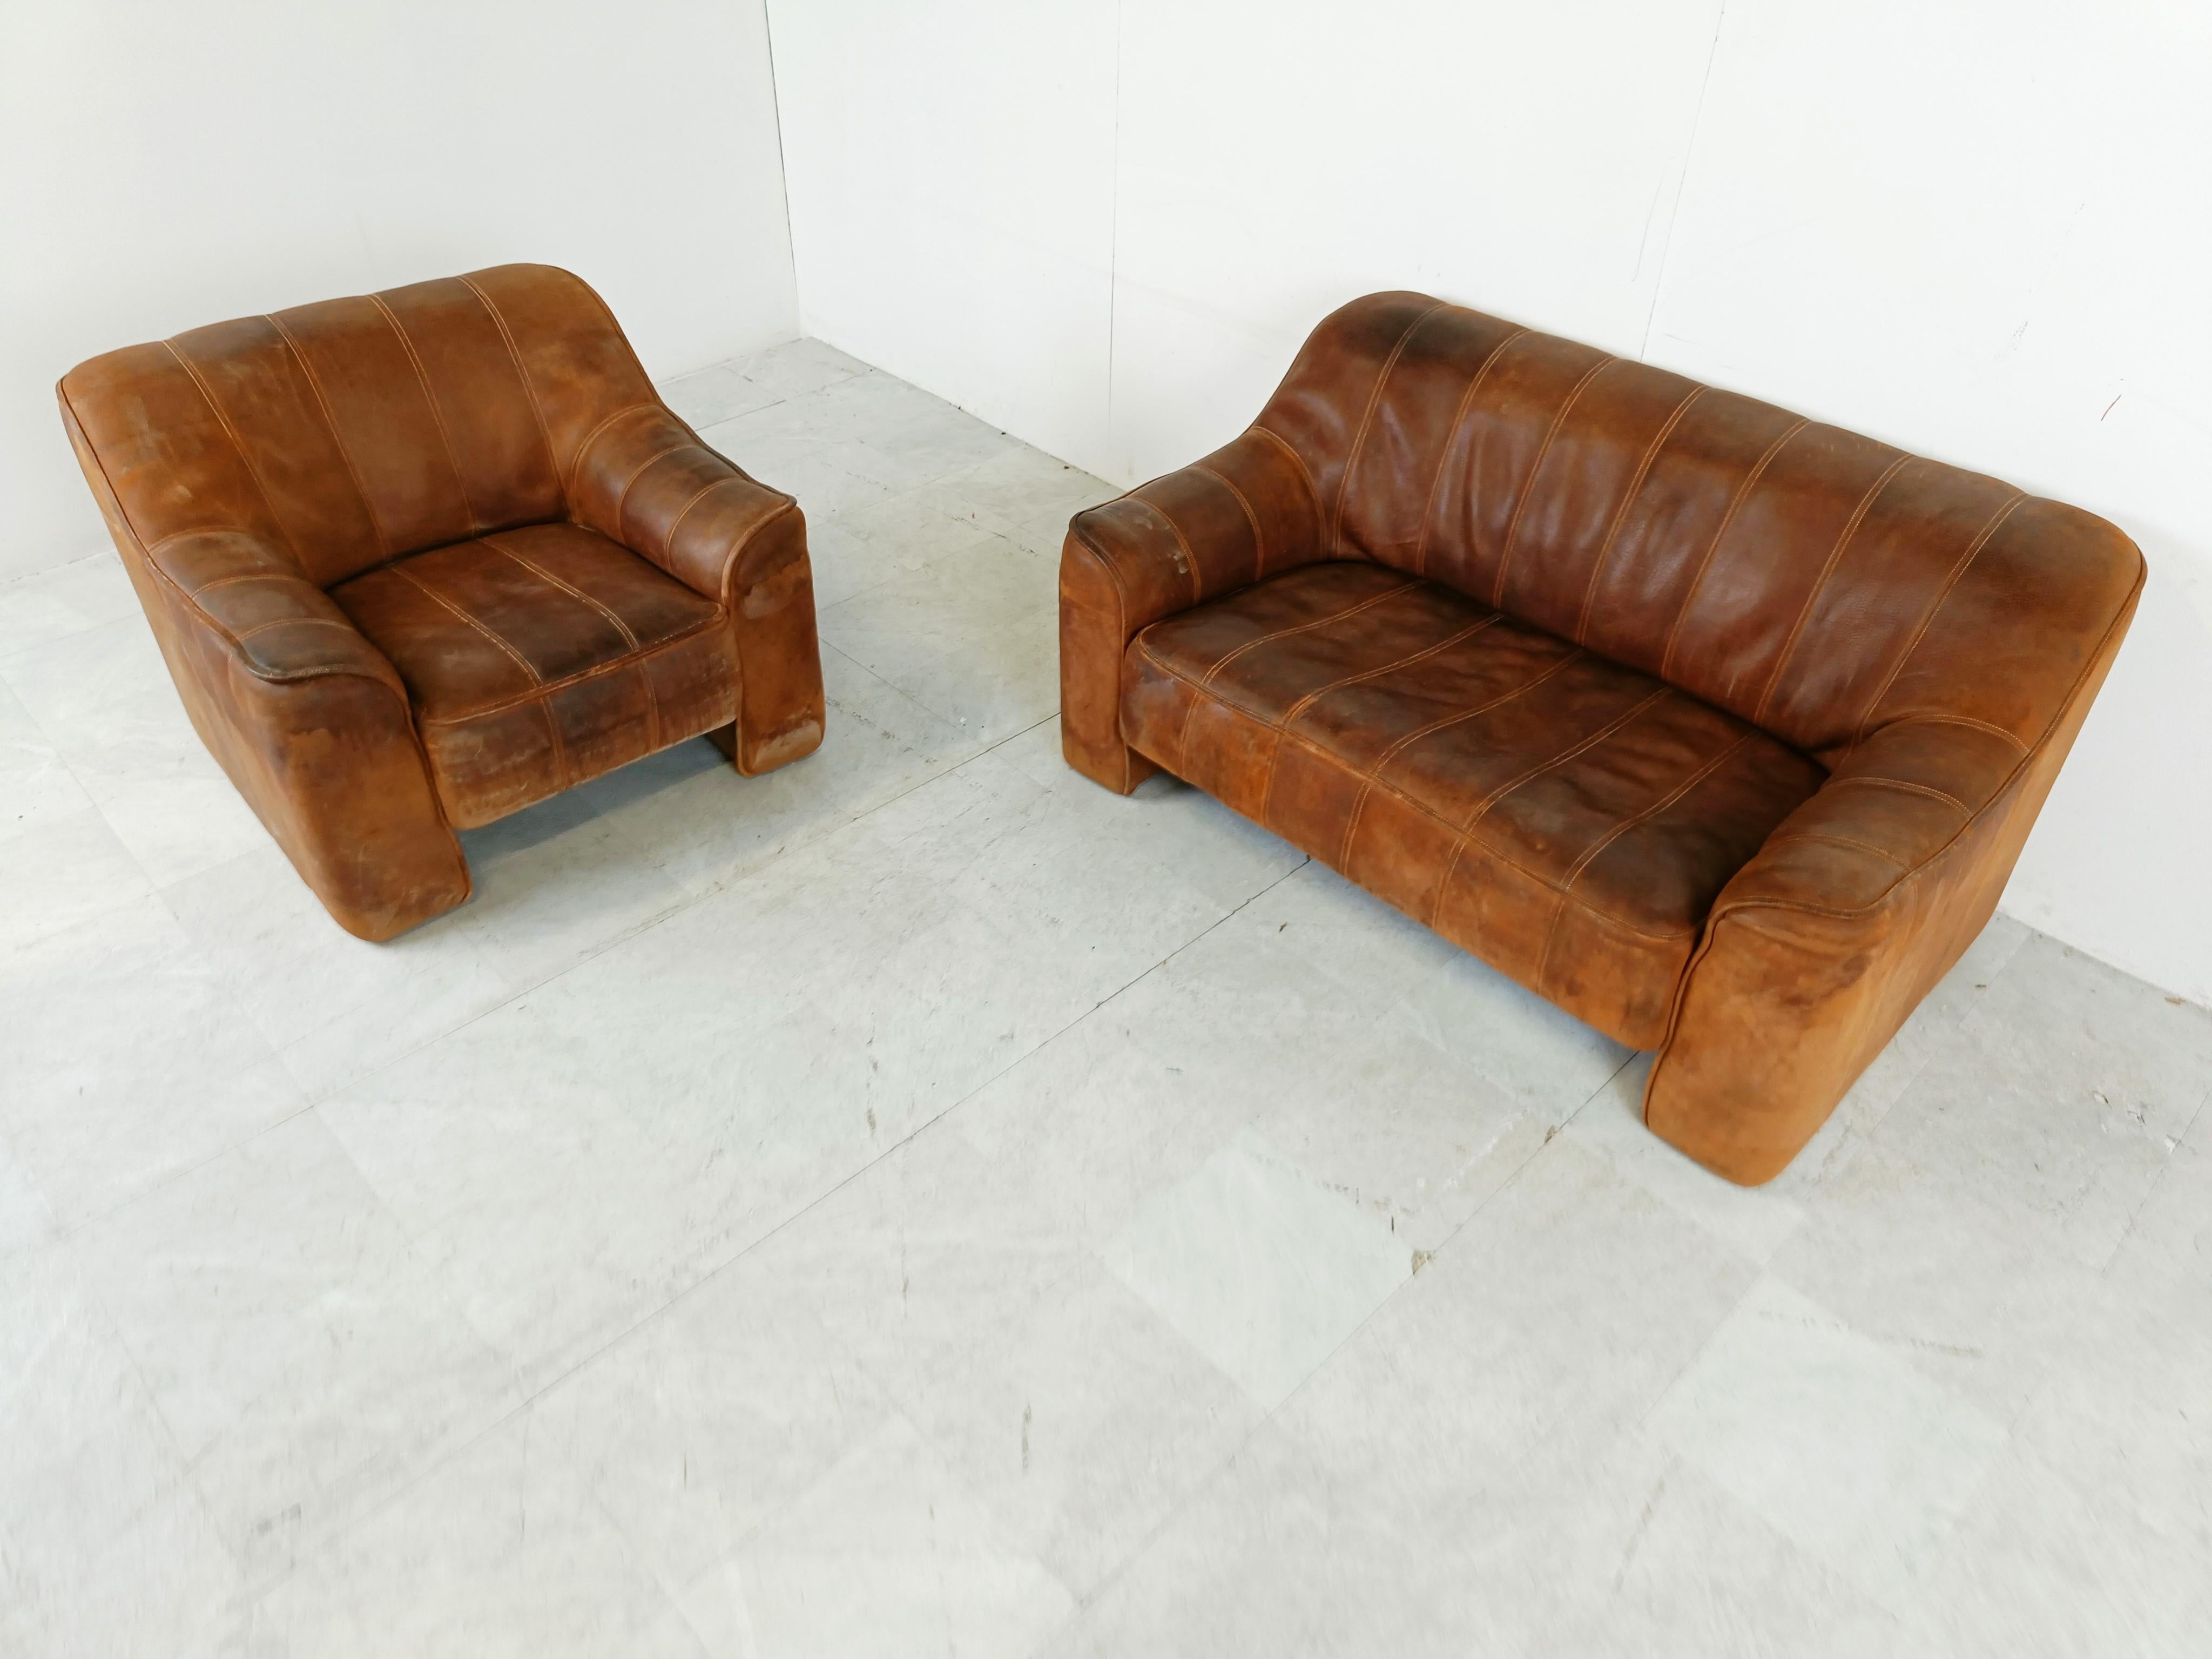 Set of gorgeous leather DS44 sofas from De Sede.

De Sede, renowned for using the best quality leather has created some wonderful sofas.

These are no exception and the beautiful, thick Neck leather will be ever lasting.

Combined with the curvy